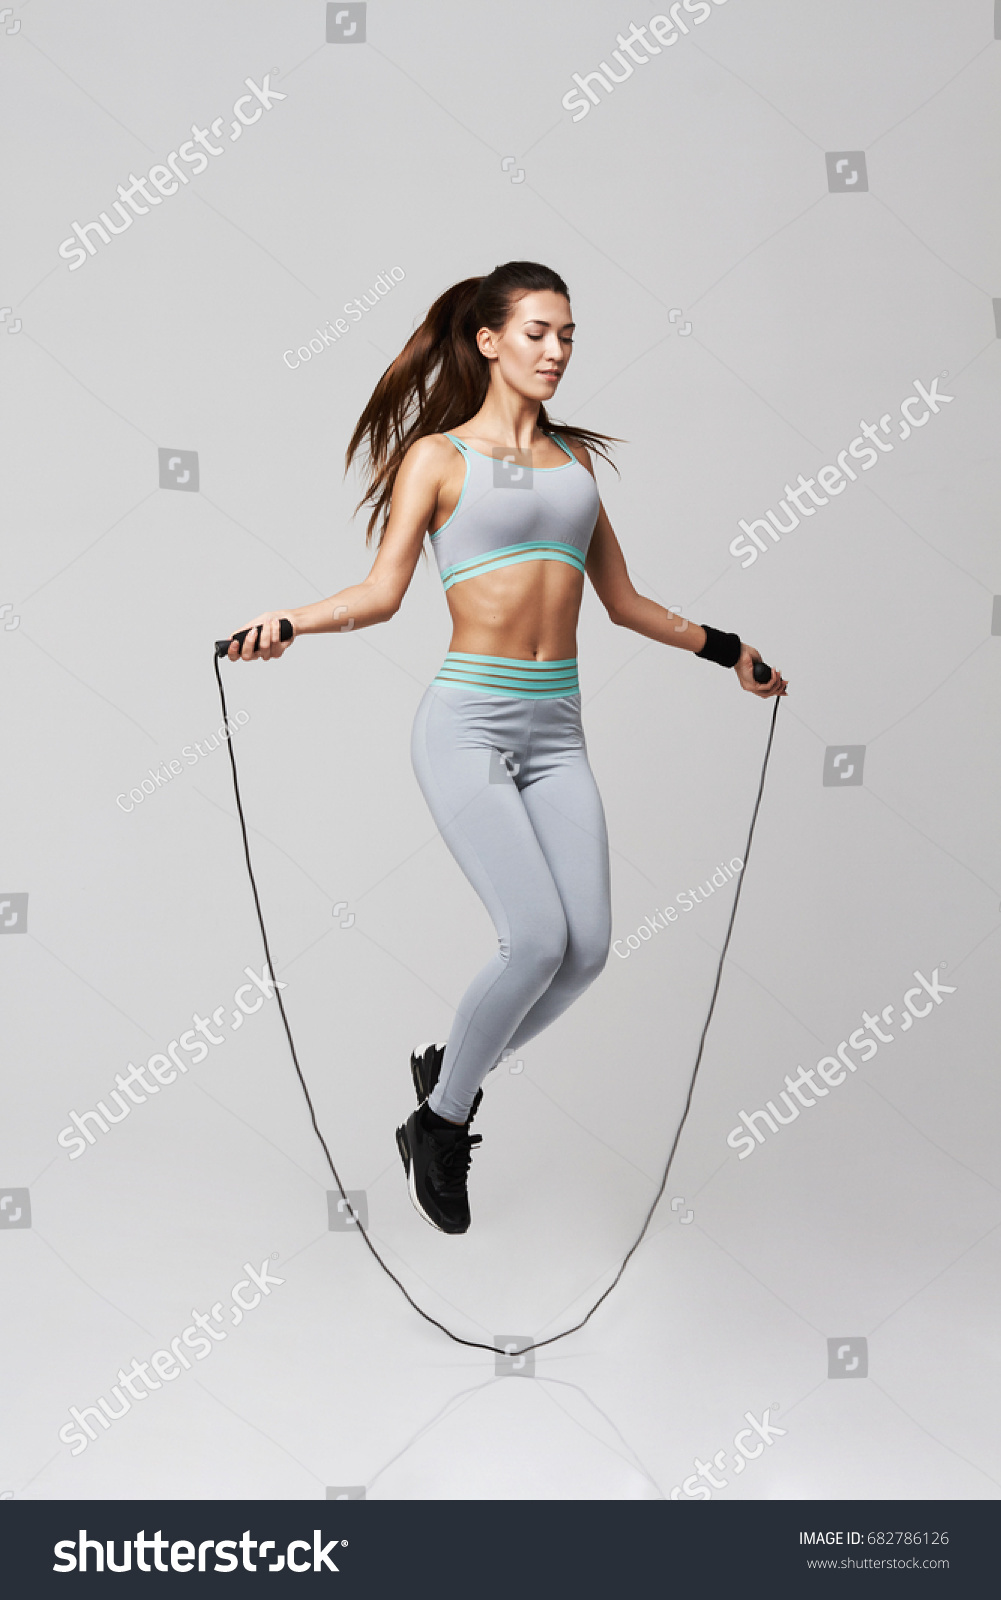 Young sportive beautiful girl doing exercises with jumping rope over white background. #682786126